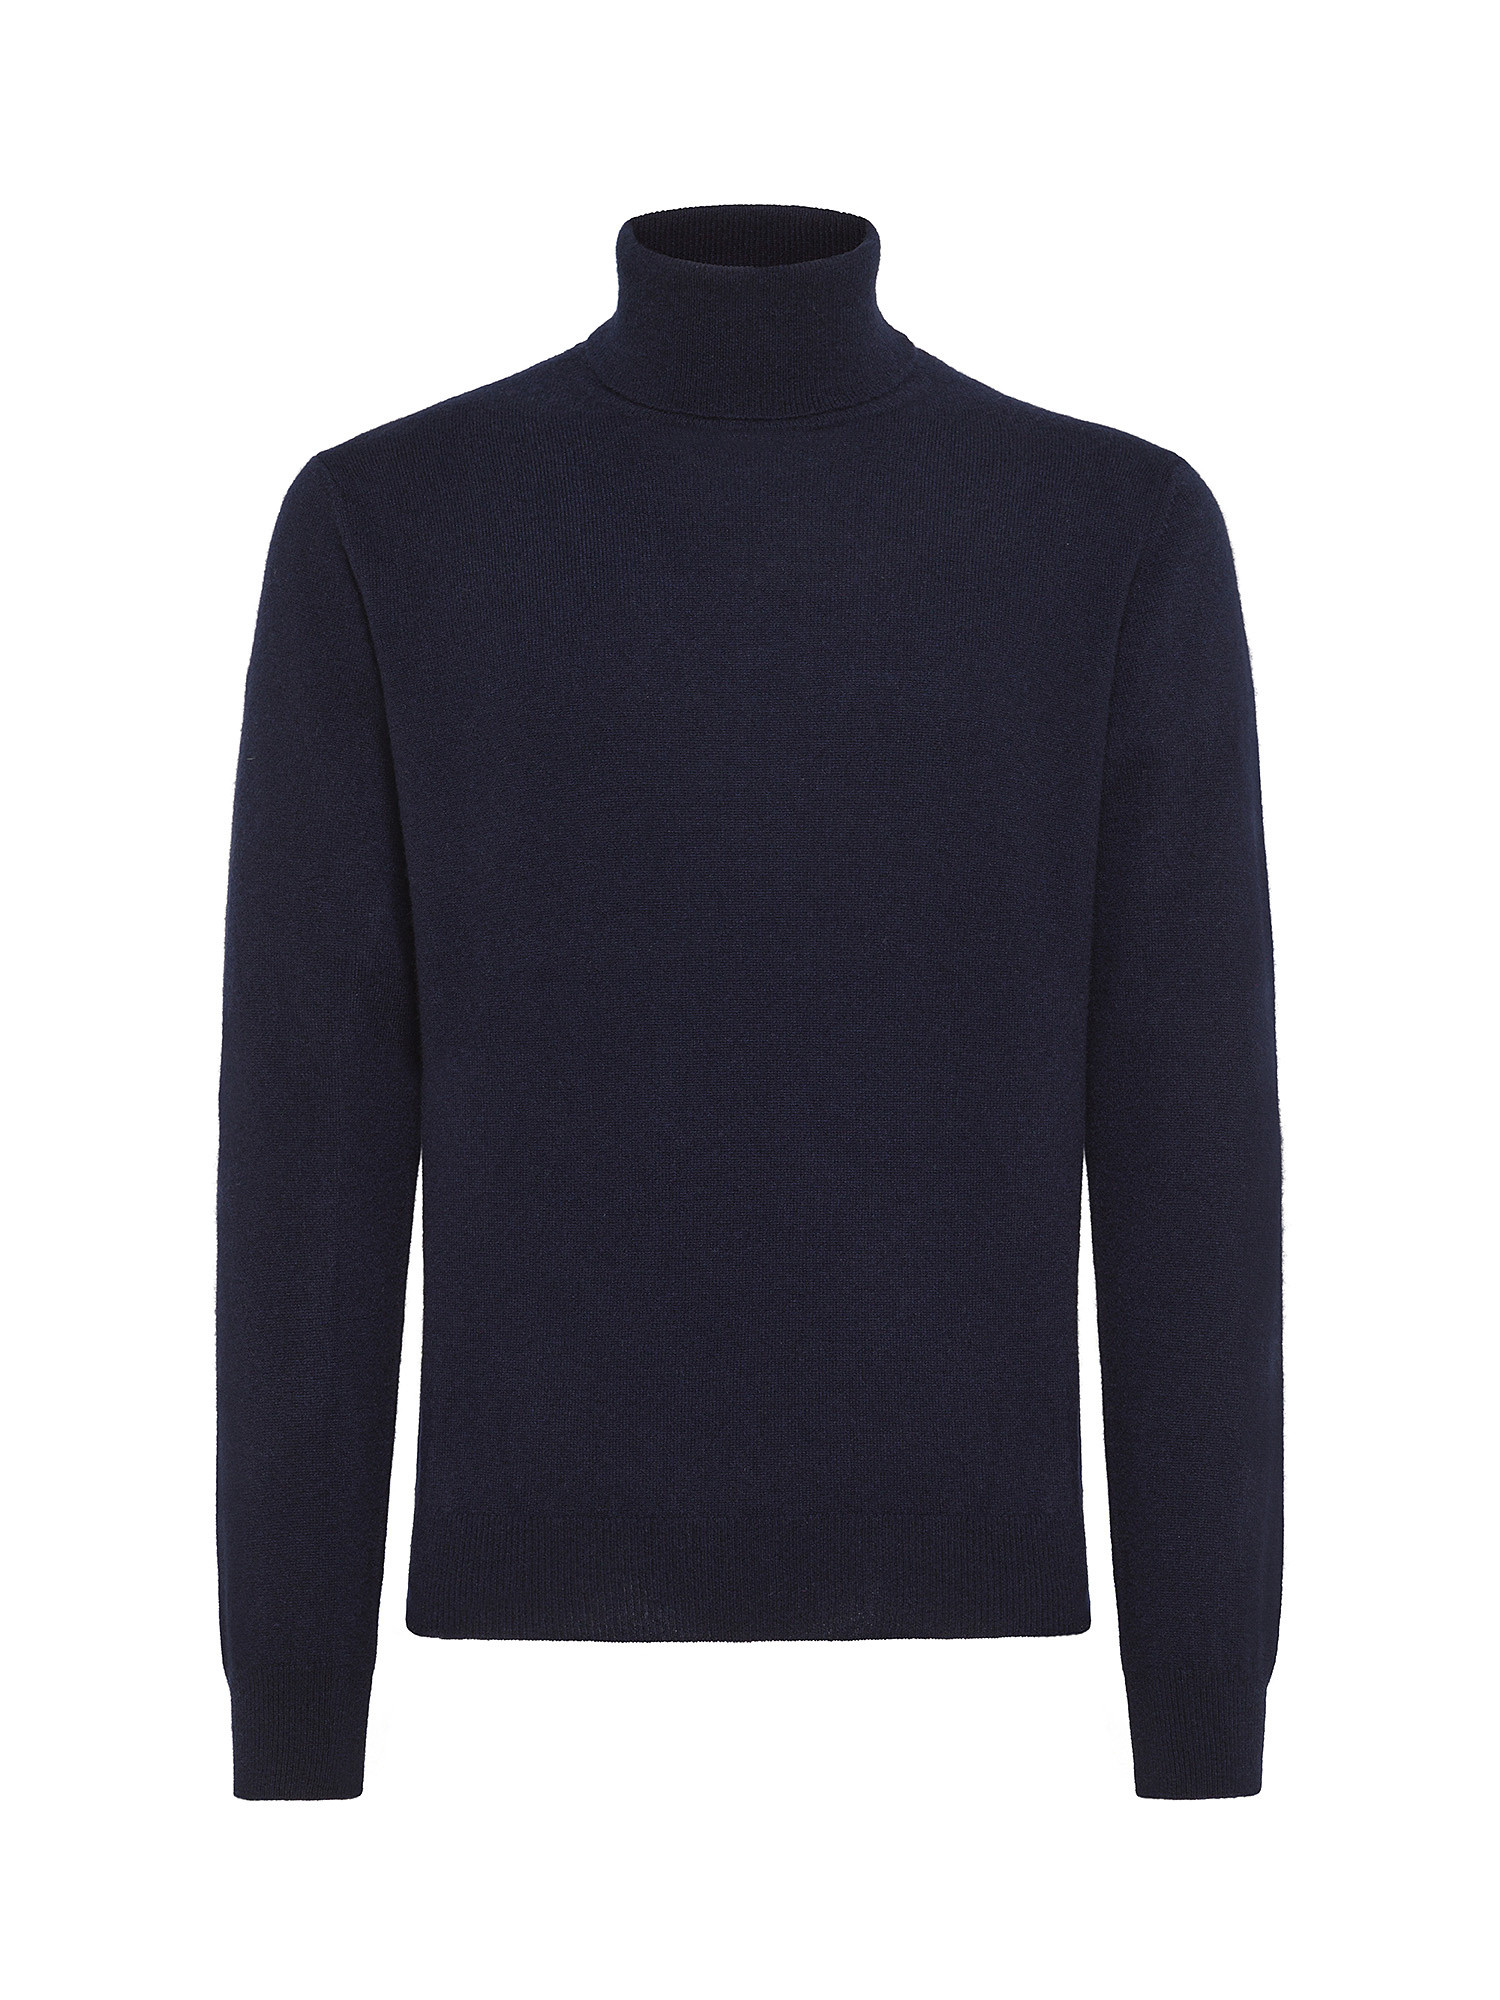 Coin Cashmere - Turtleneck in pure cashmere, Dark Blue, large image number 0